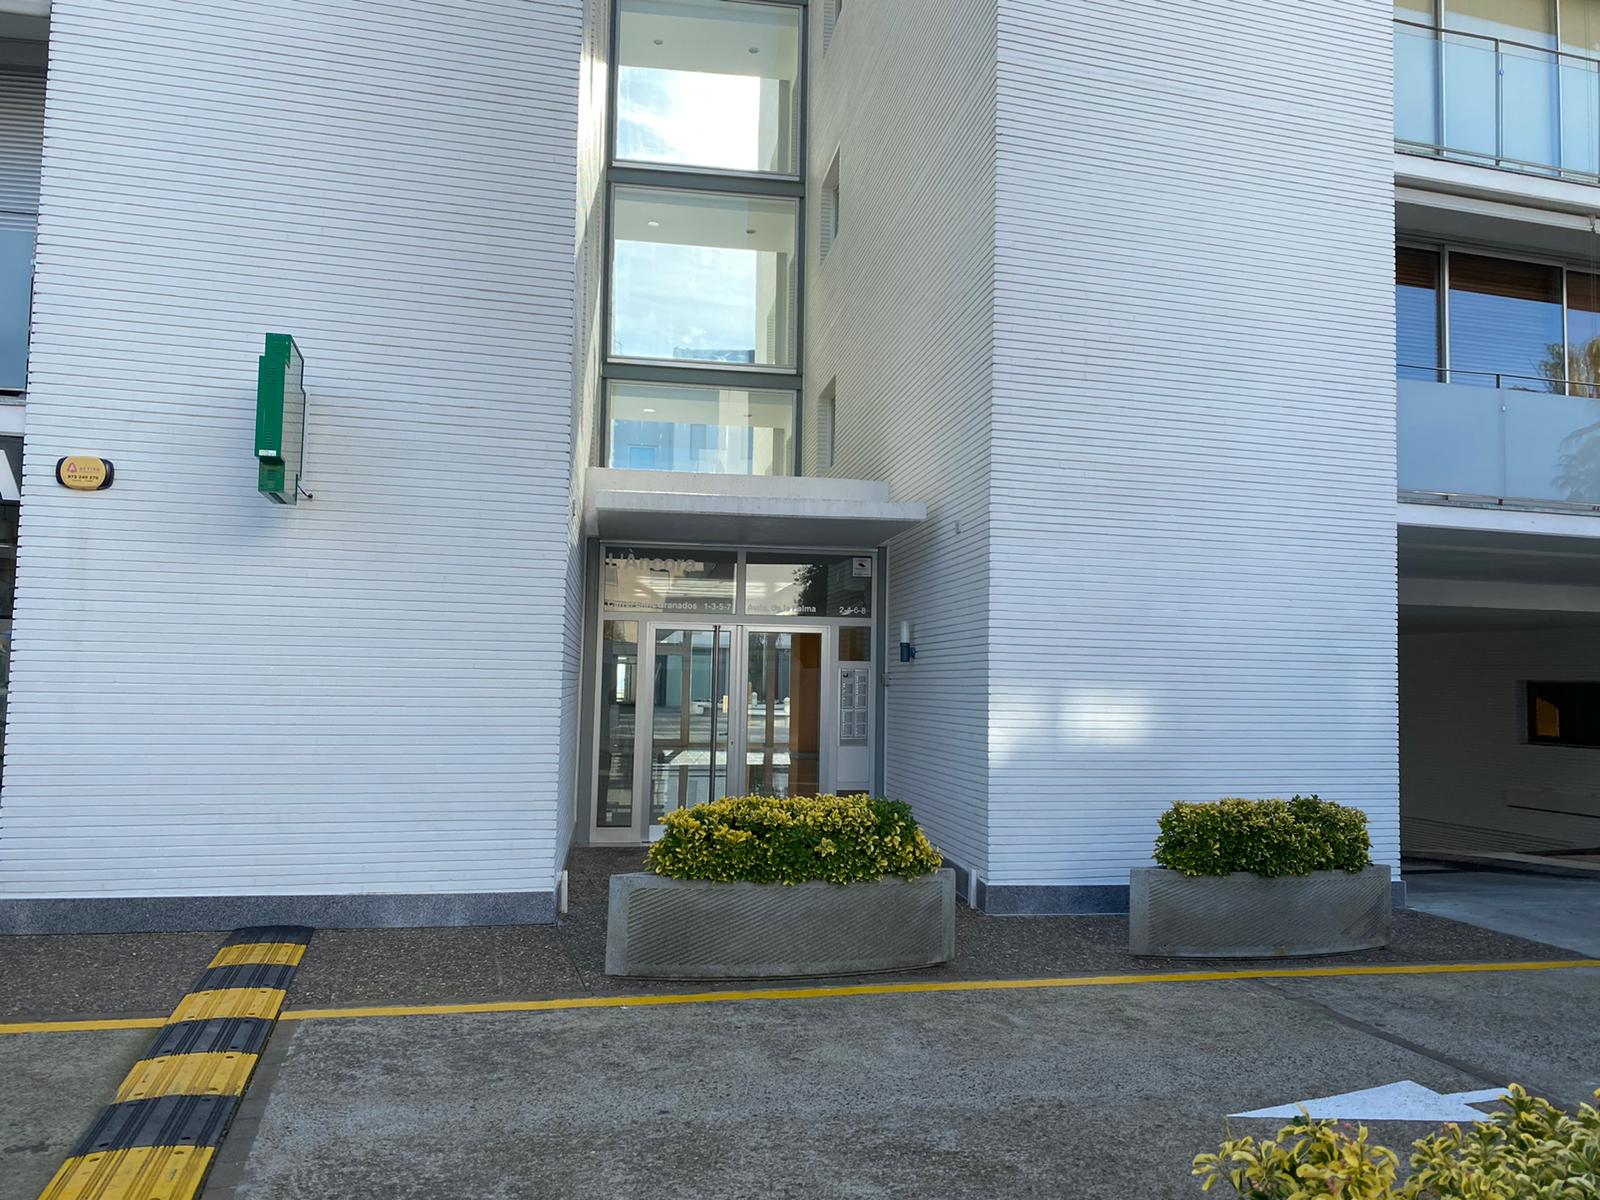 Entrance to the apartment building